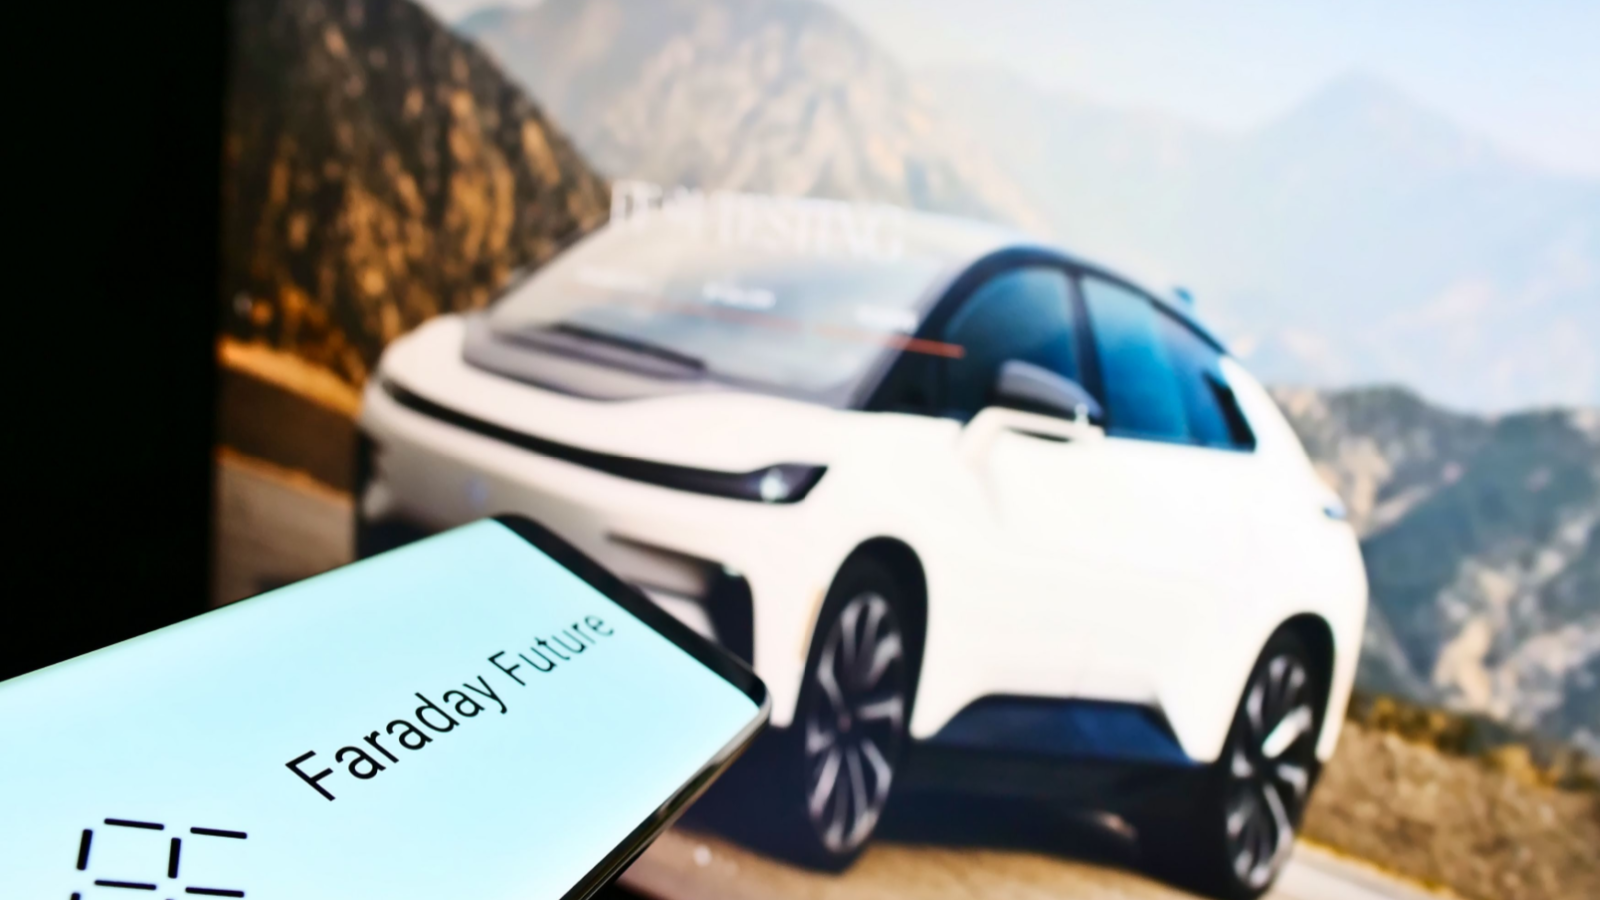 Cellphone with business logo of American electric vehicle company Faraday Future Inc. in front of web page. Focus on center of phone display. Unmodified photo.. FFIE stock